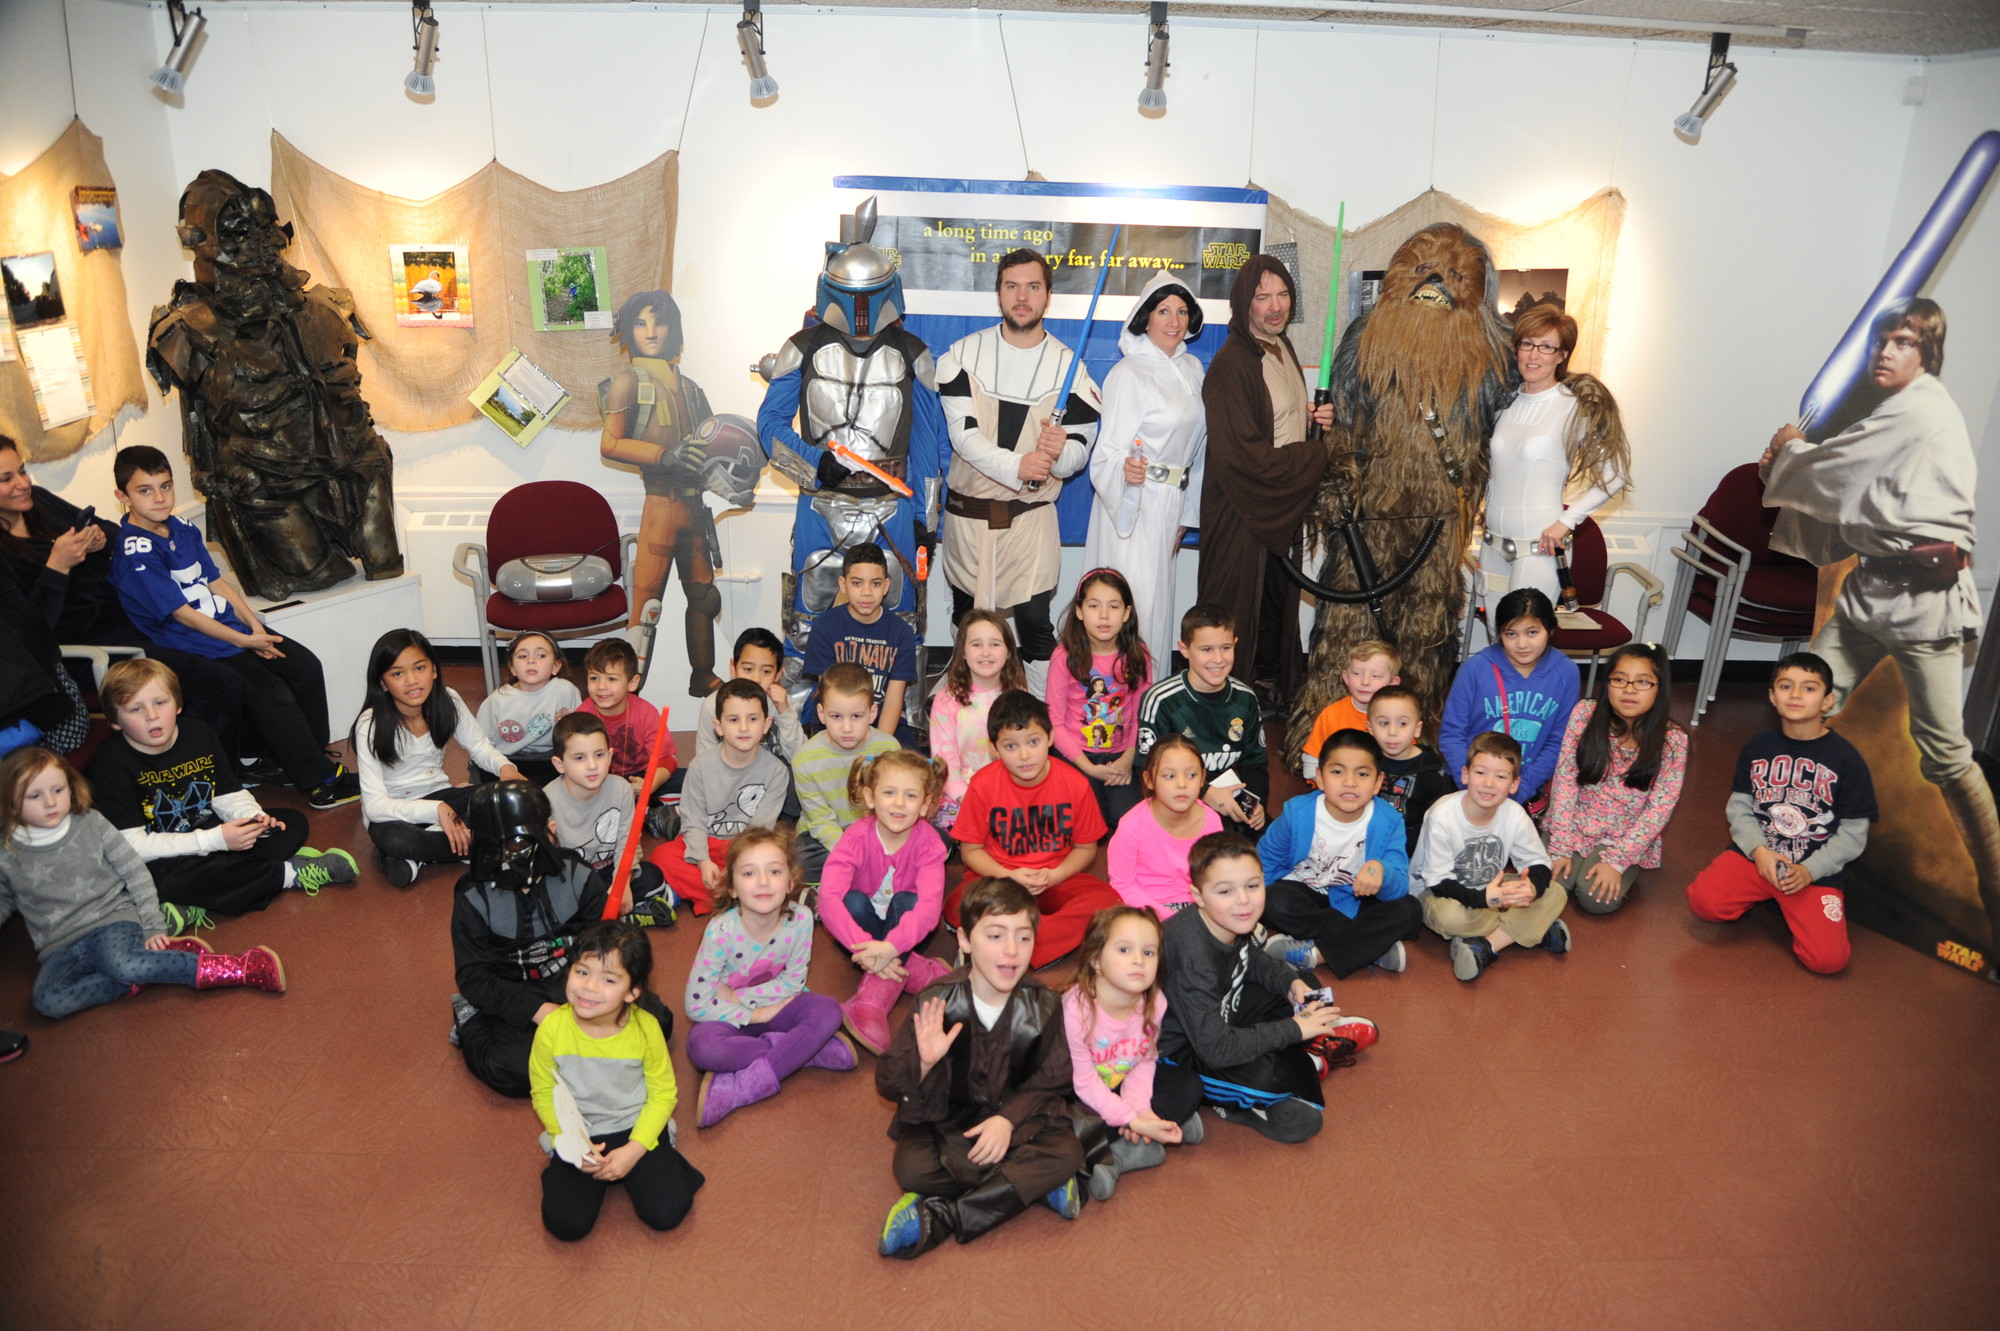 Local children flooded the Bellmore Memorial Library on Jan. 25 for Star Wars Day.